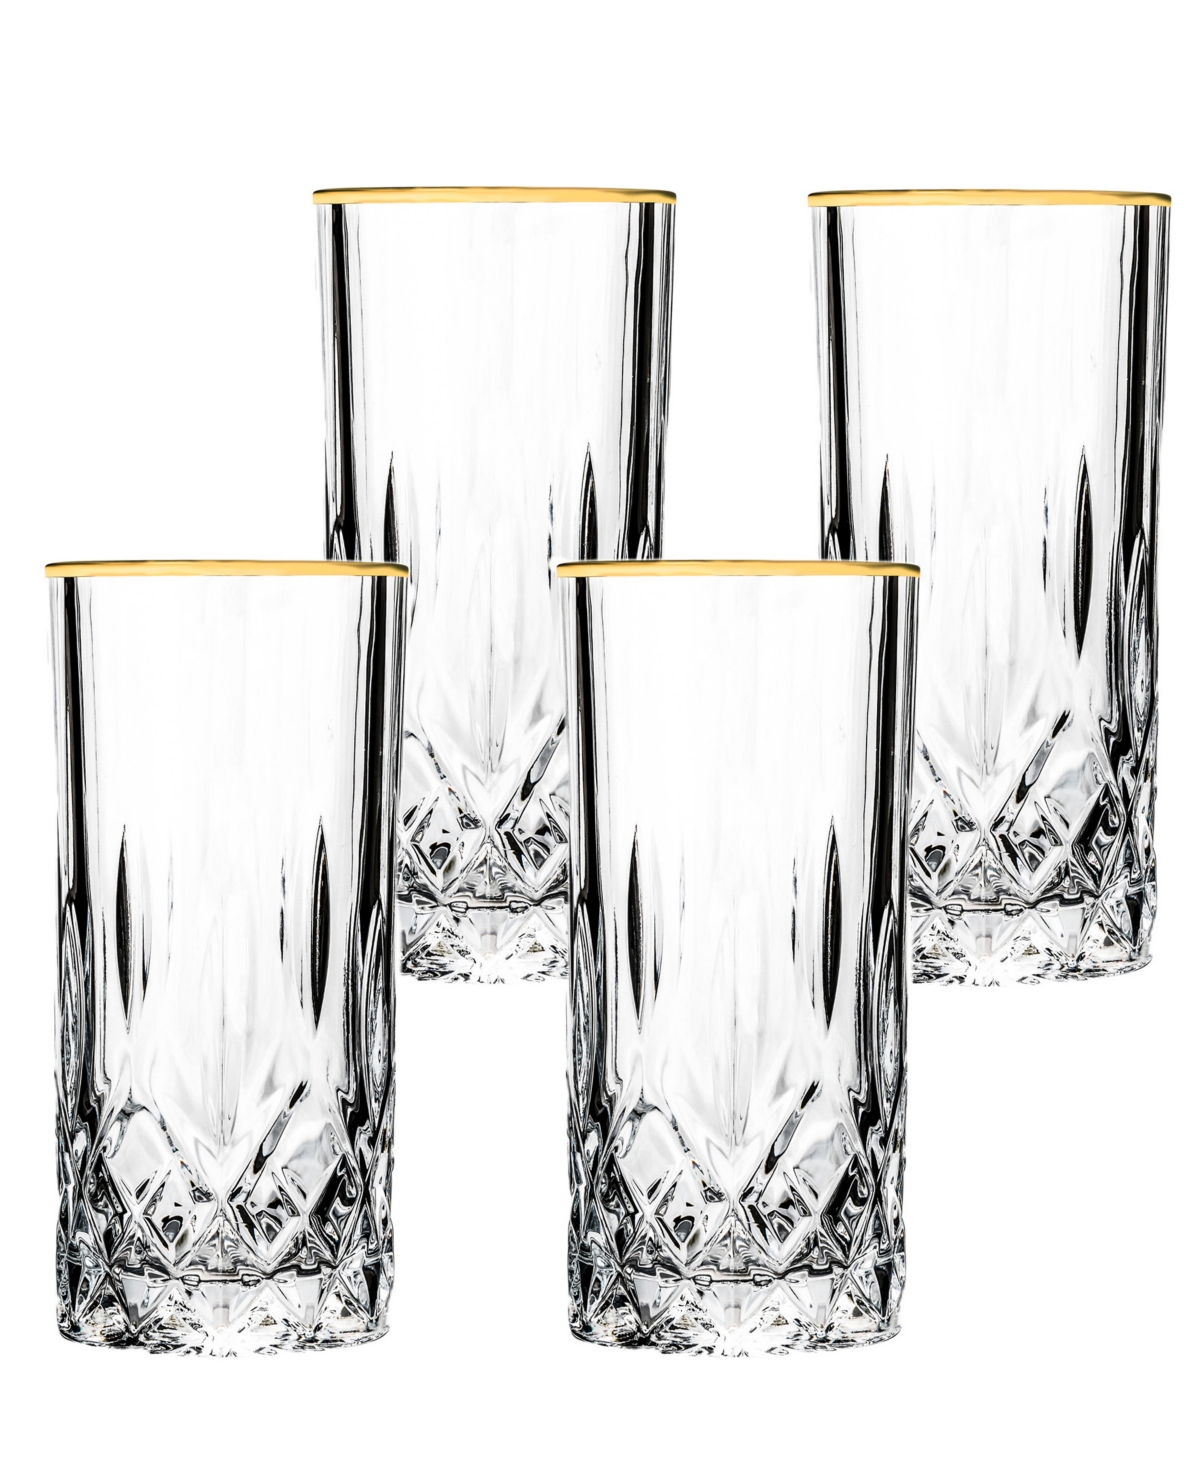 Shop Lorren Home Trends Opera Gold Collection 4 Piece Crystal High Ball Glass With Gold Rim Set In Gold-tone